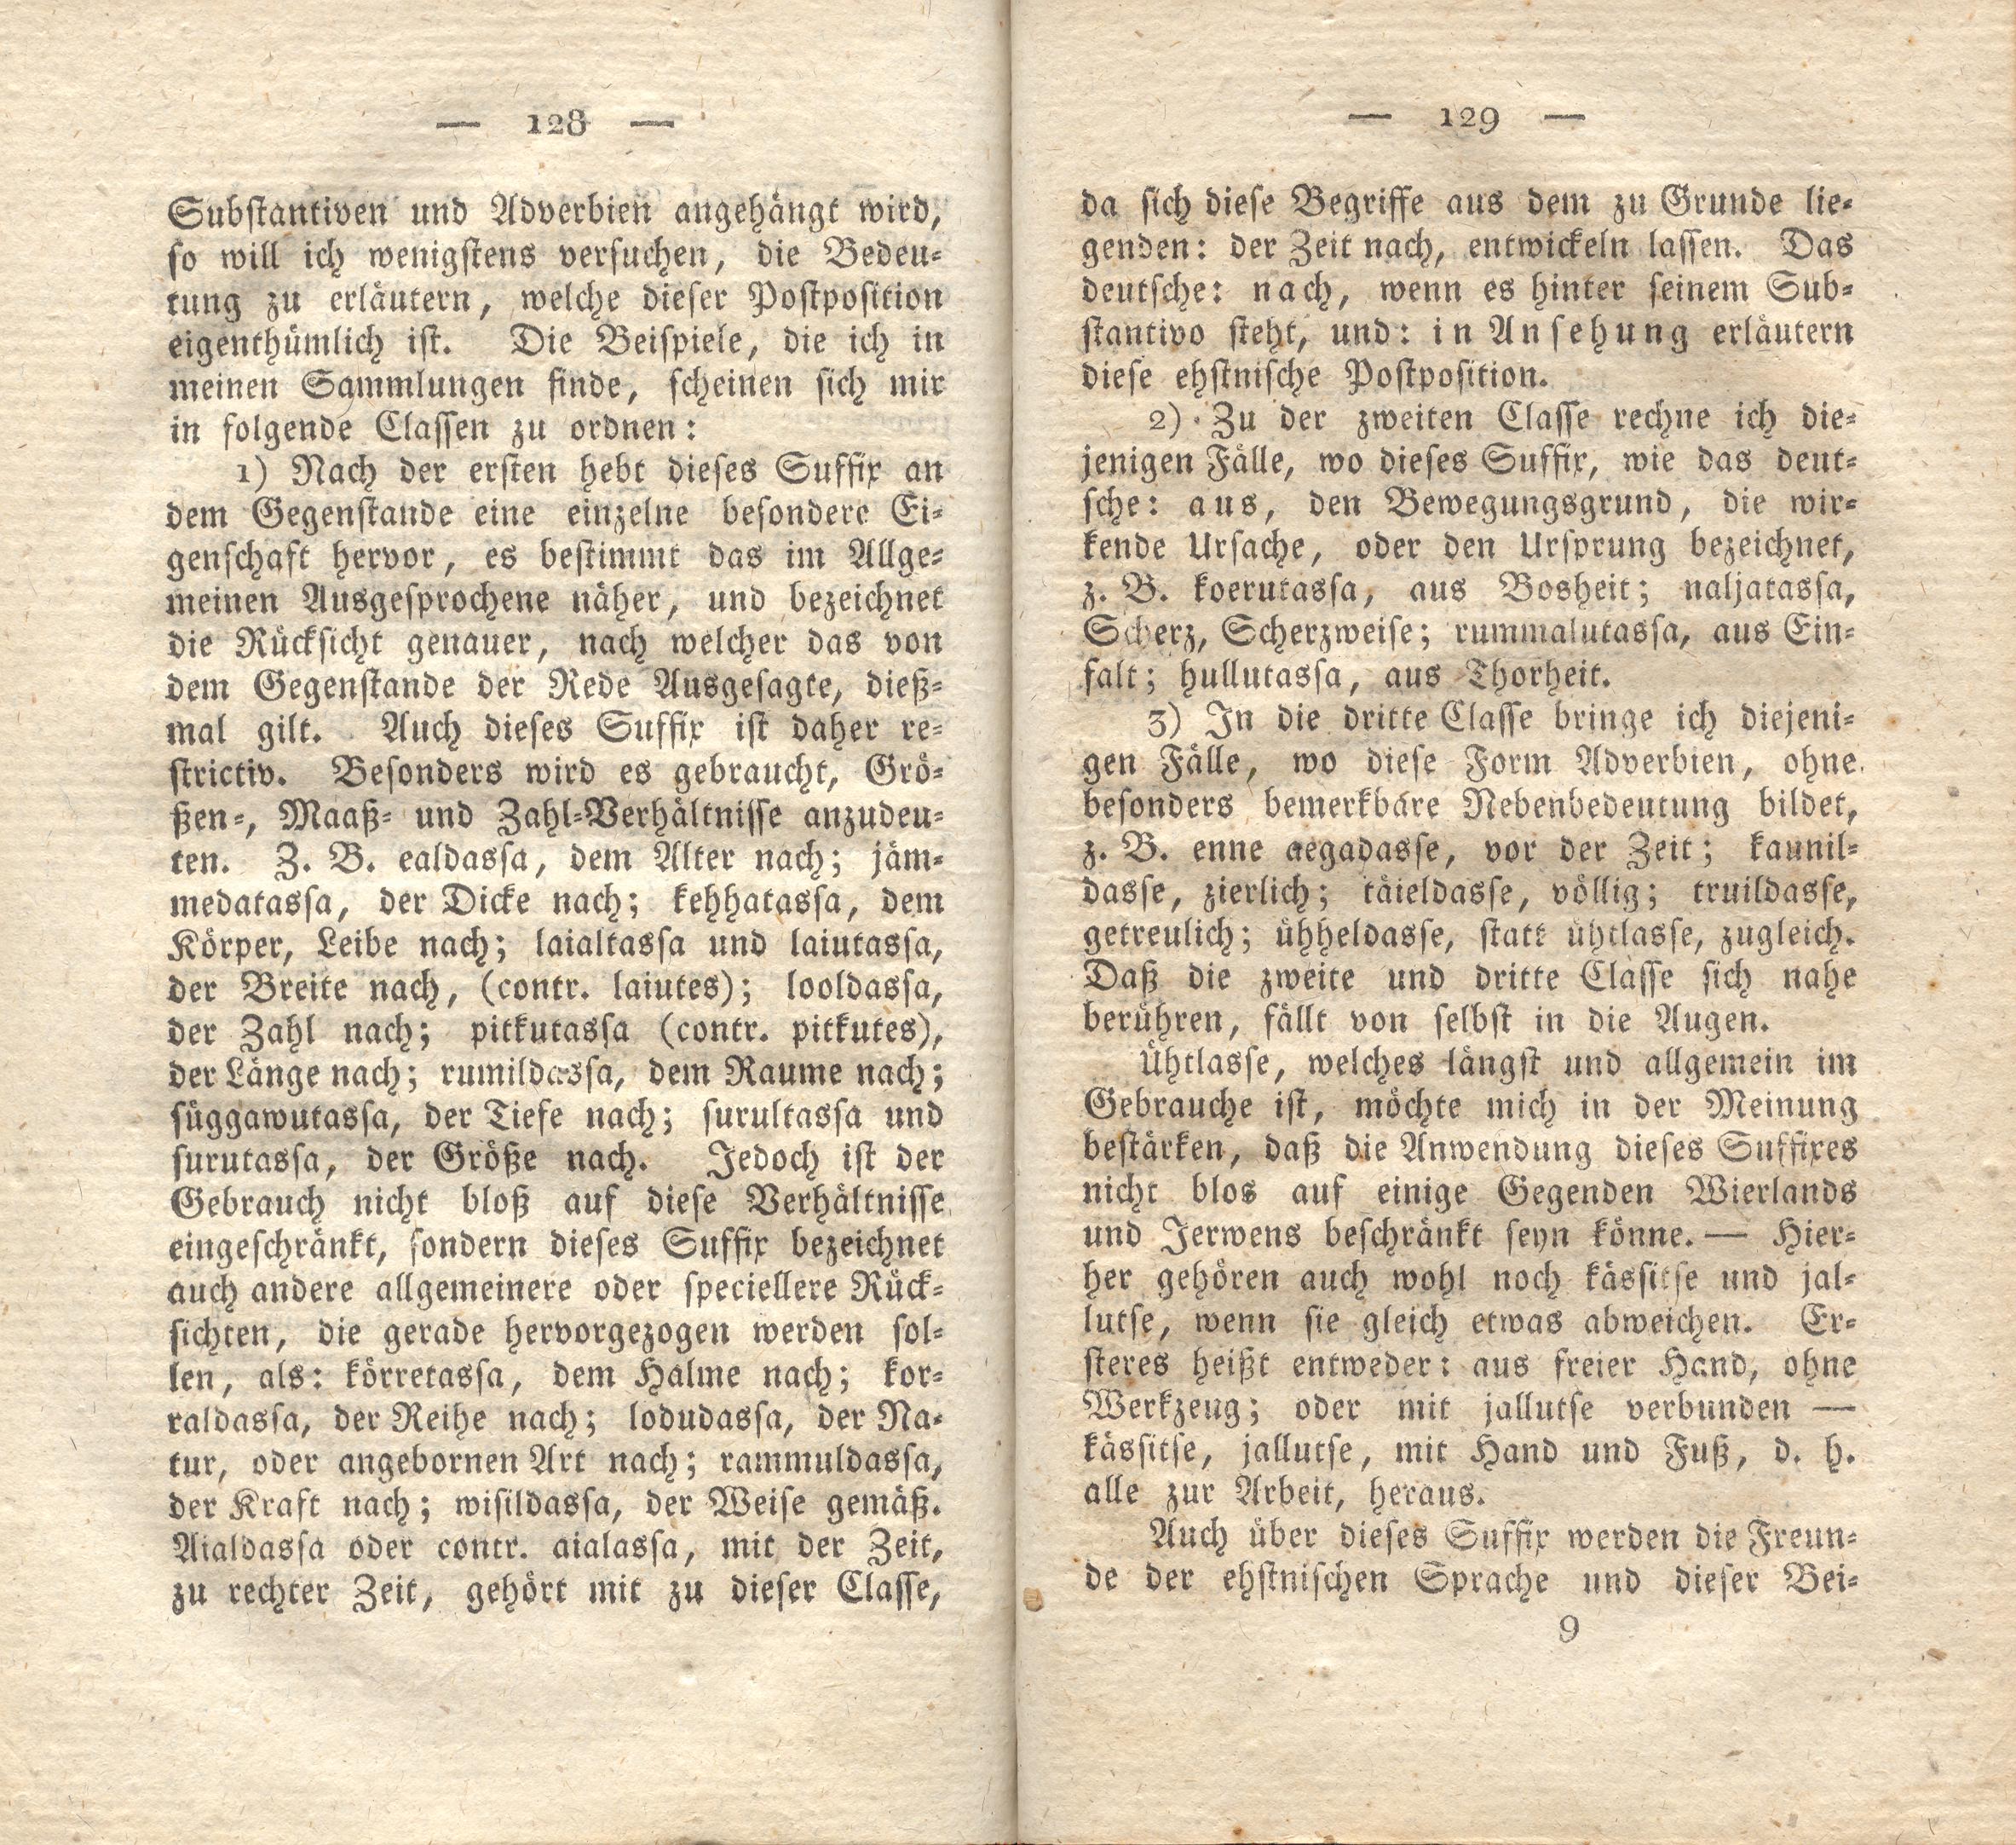 Beiträge [13] (1821) | 72. (128-129) Main body of text